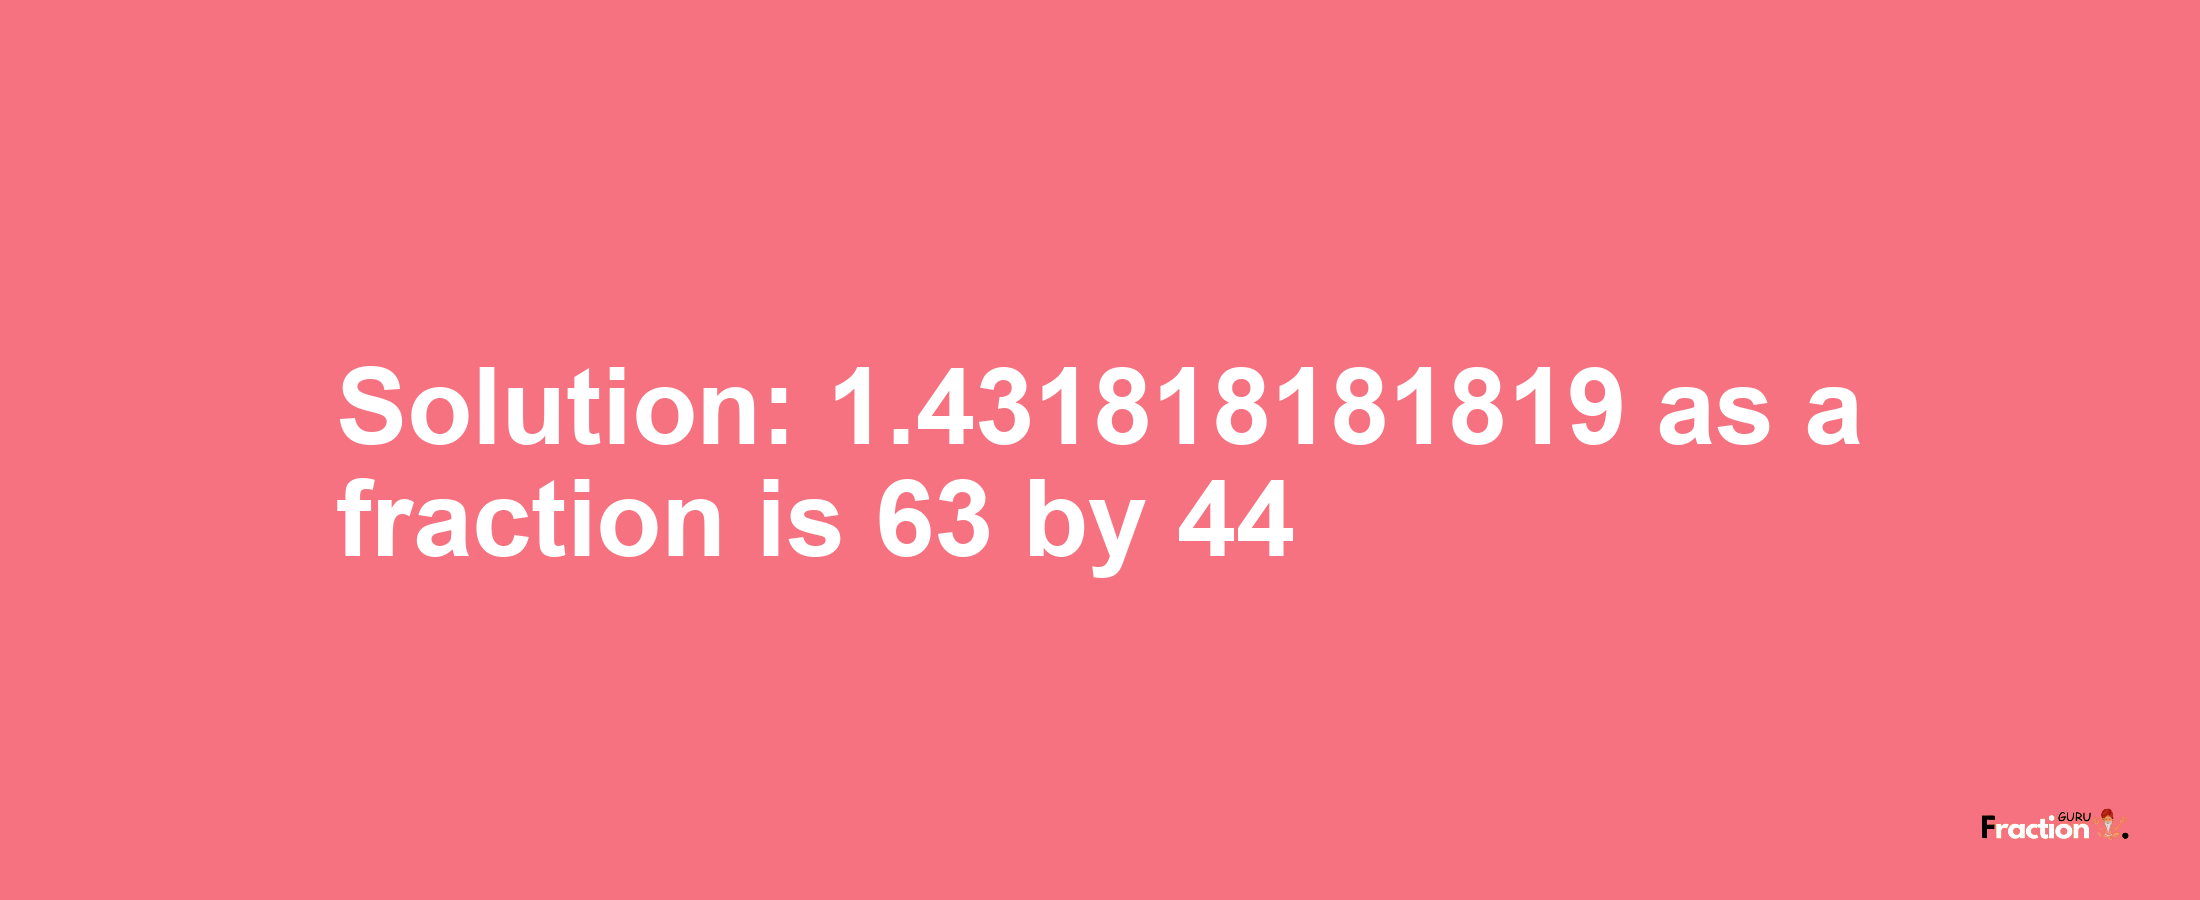 Solution:1.431818181819 as a fraction is 63/44